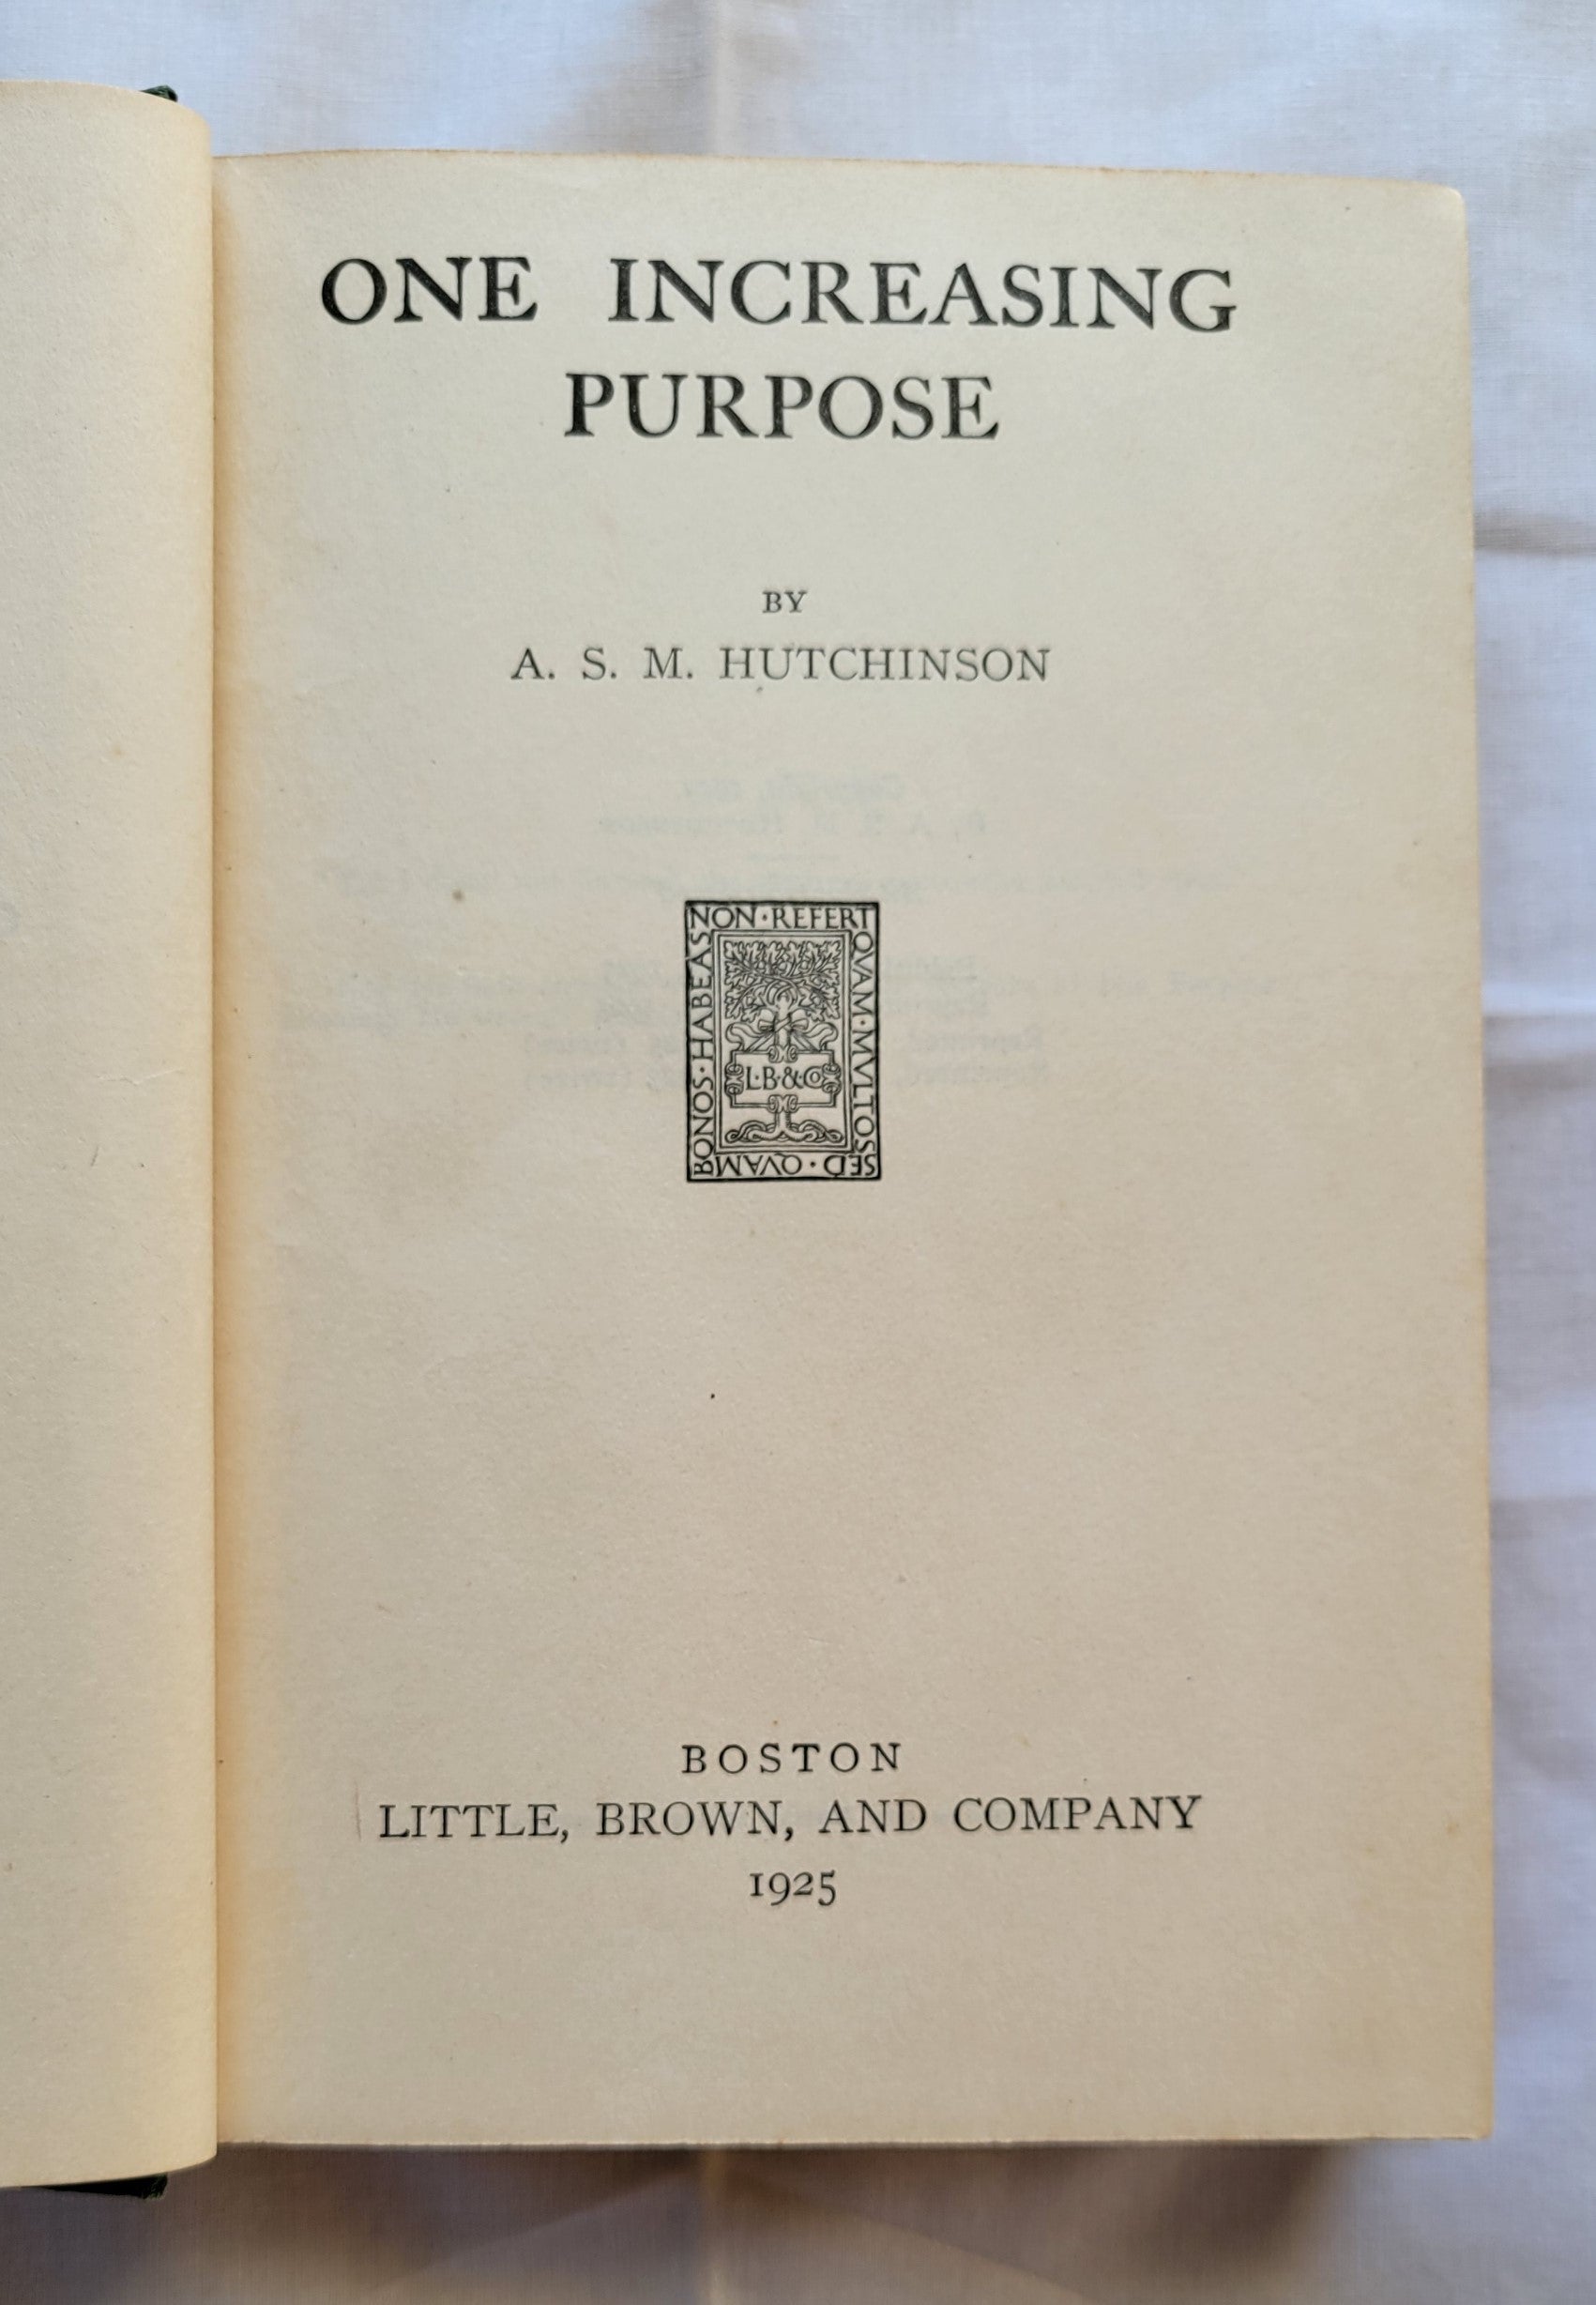 Vintage book for sale, "One Increasing Purpose" by A. S. M. Hutchinson, published by Little, Brown and Company, 1925.  View of title page.